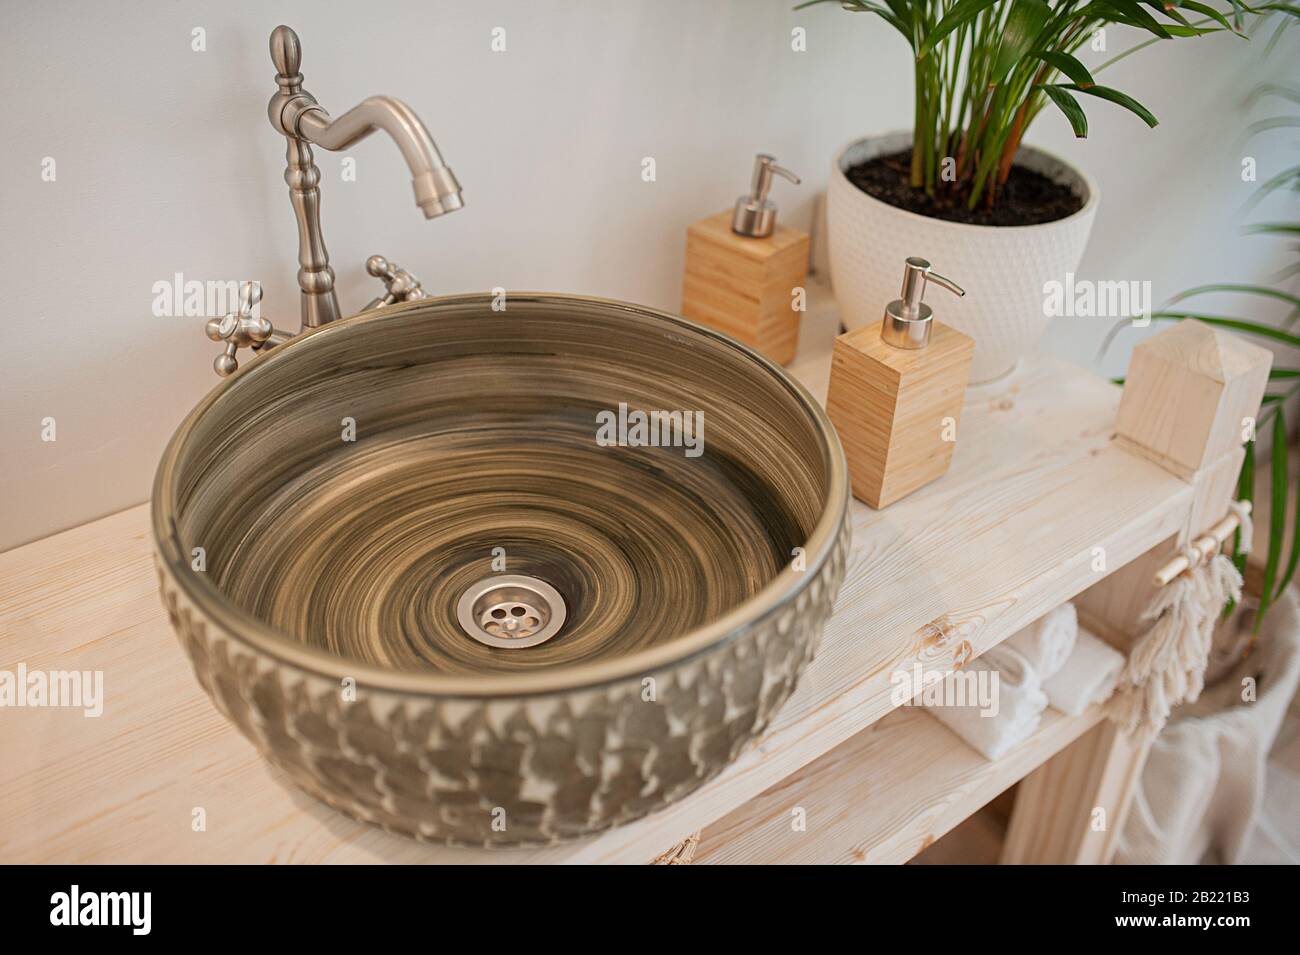 Round Dark Unusual Stone Sink On A Wooden Countertop And Reusable